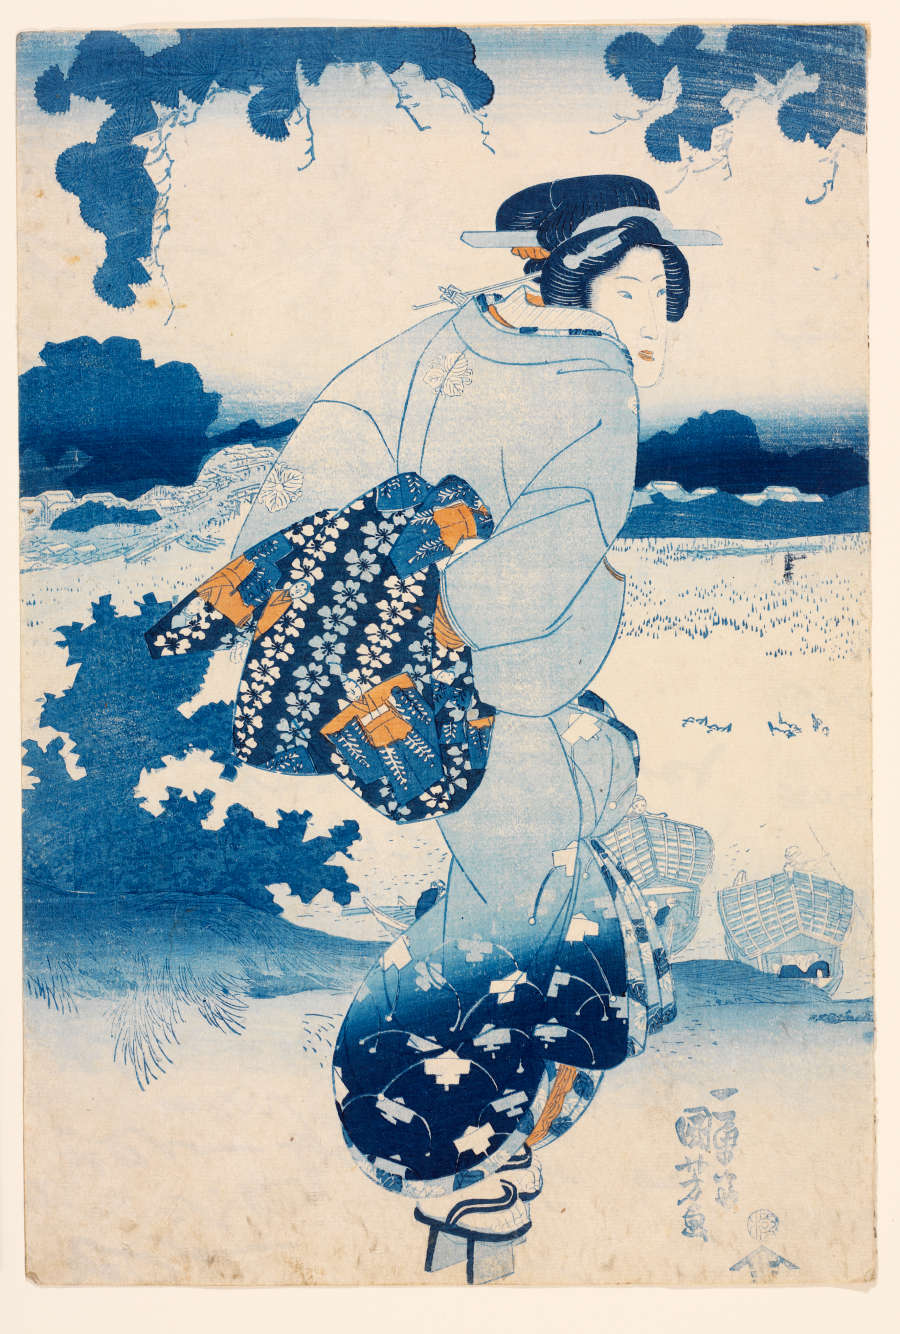 Japanese woodblock print of a woman in a blue kimono holding a patterned fabric behind her back. She is looking over her shoulder against a monochrome backdrop of blue clouds and landscapes.